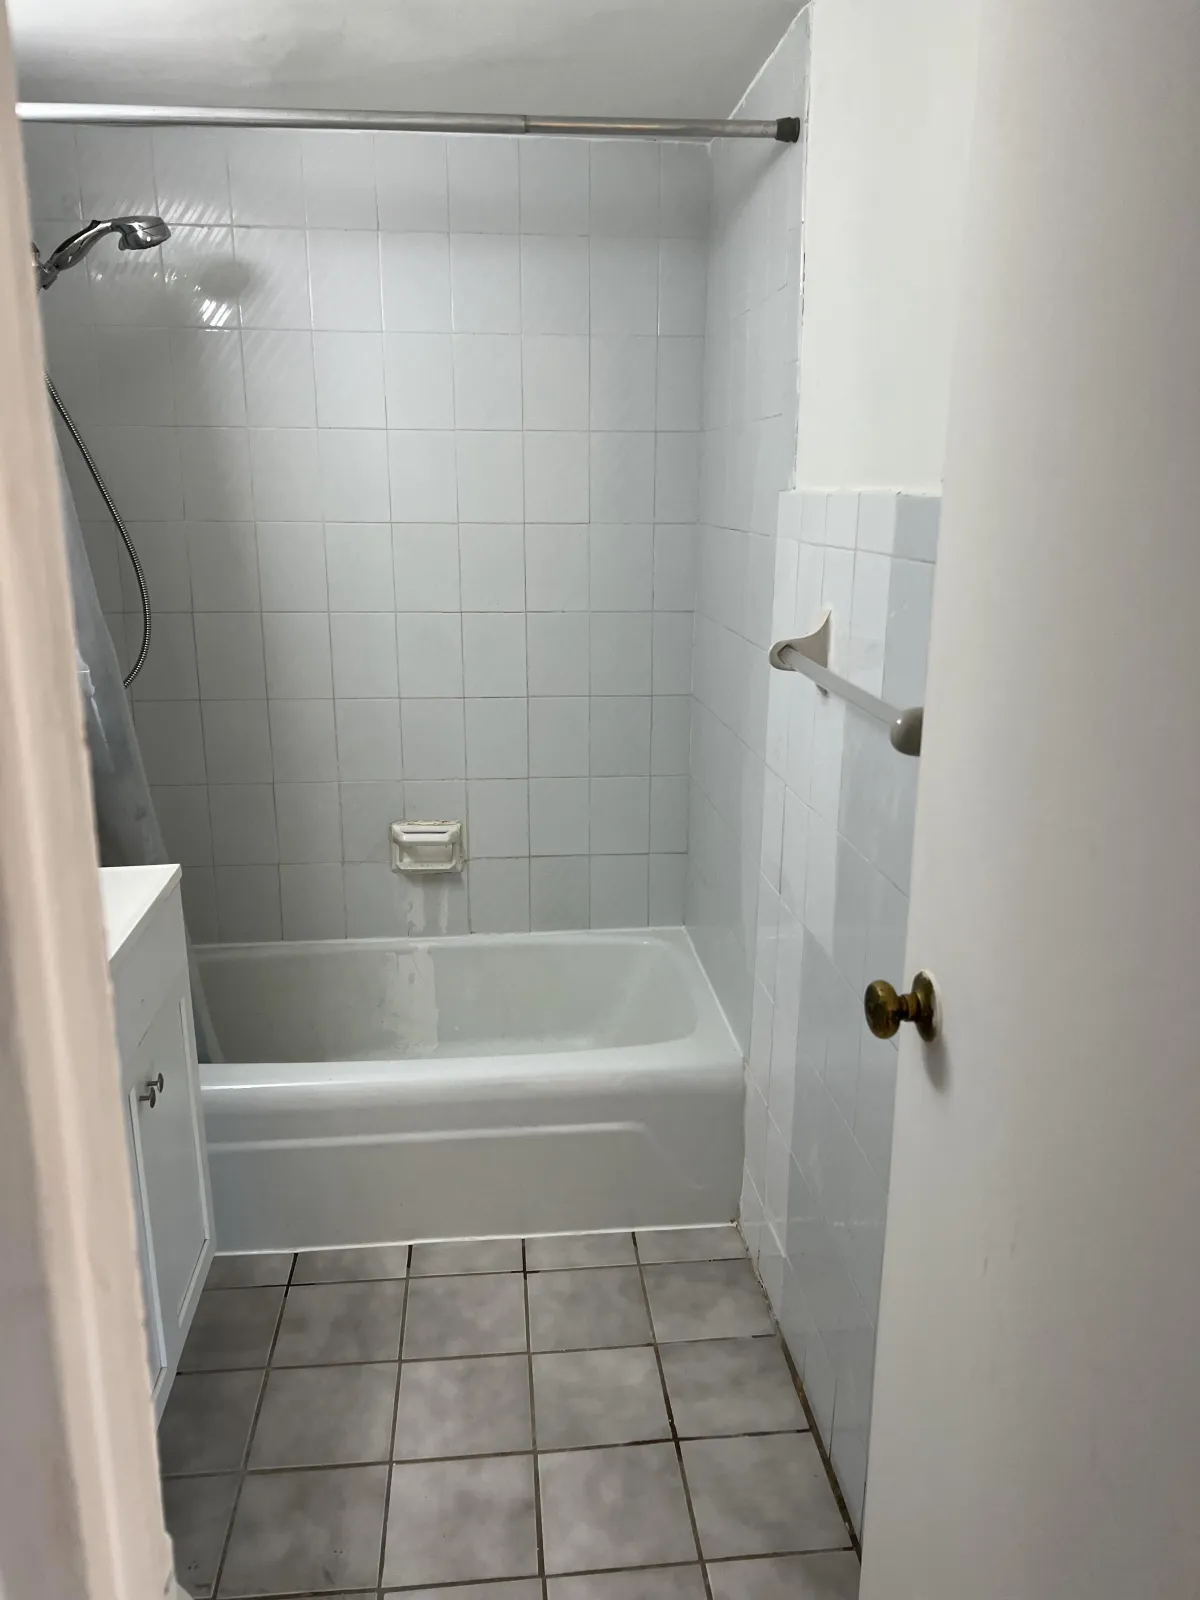 NJ Contractor reliable affordble service for bathroom remodels